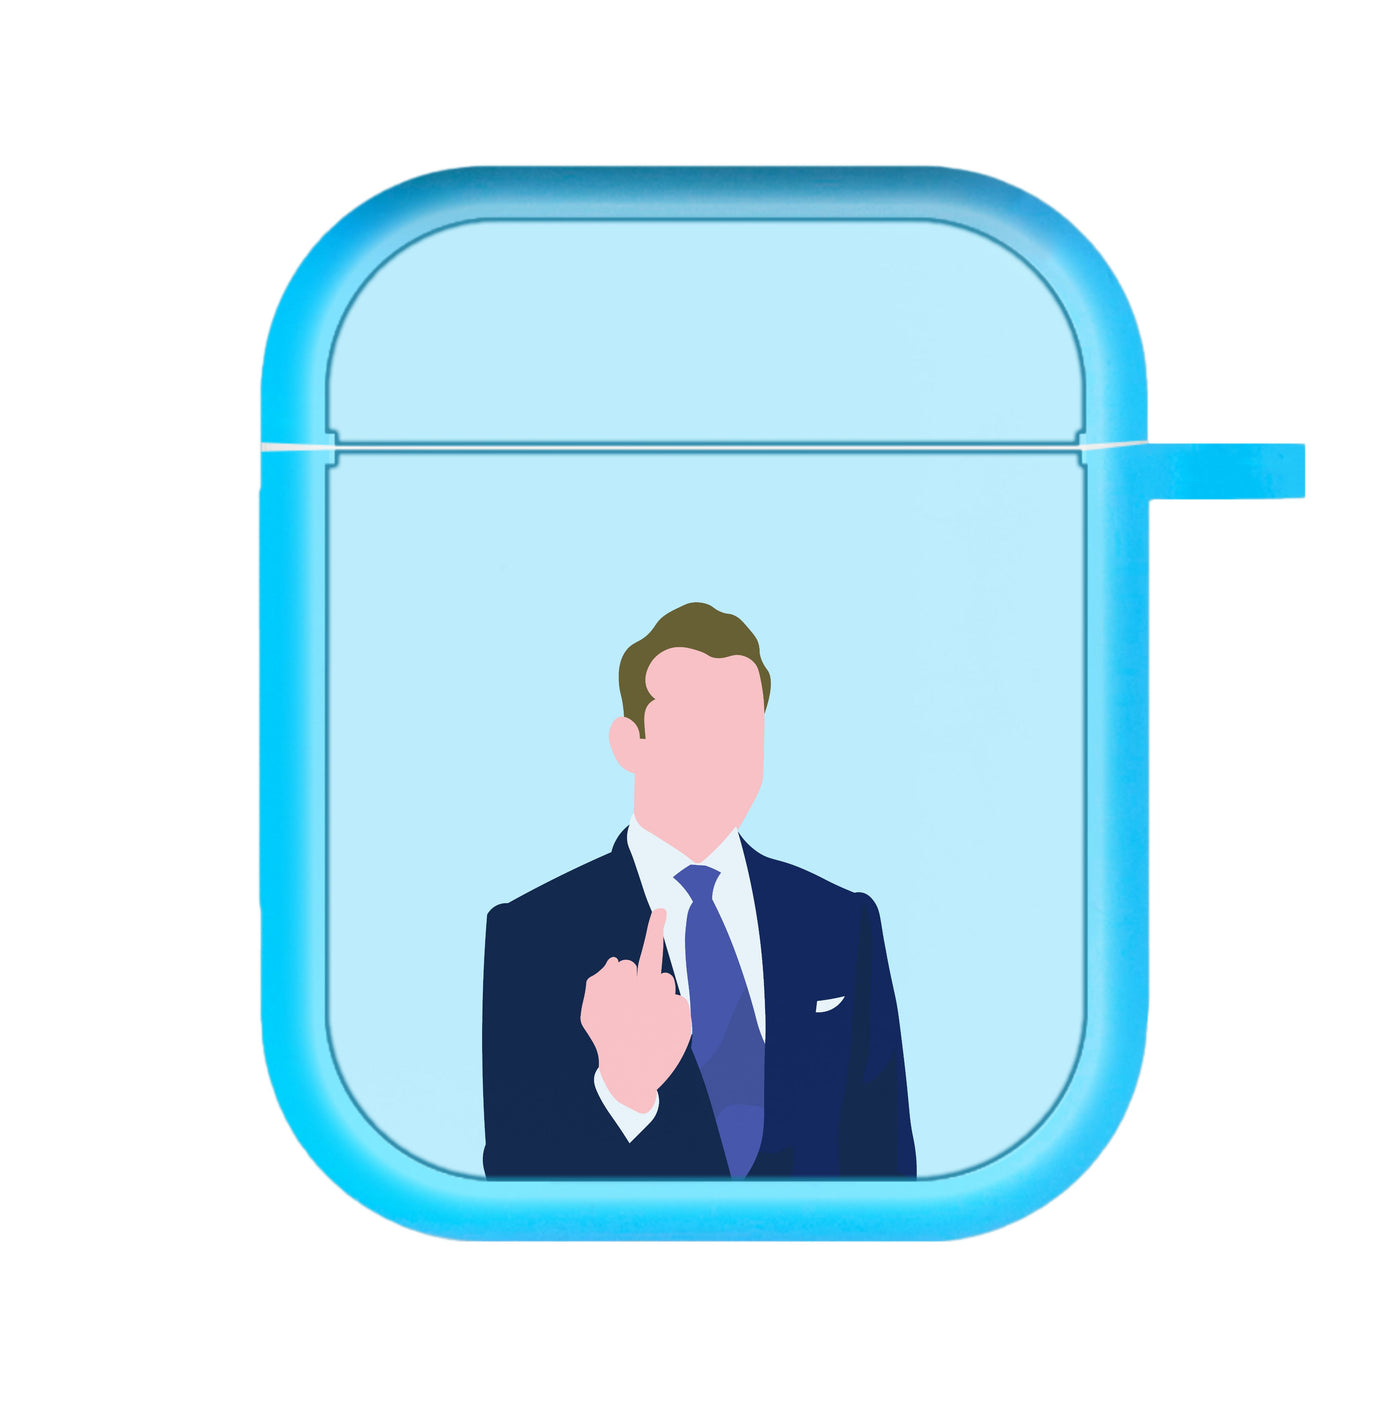 Middle Finger - Suits AirPods Case